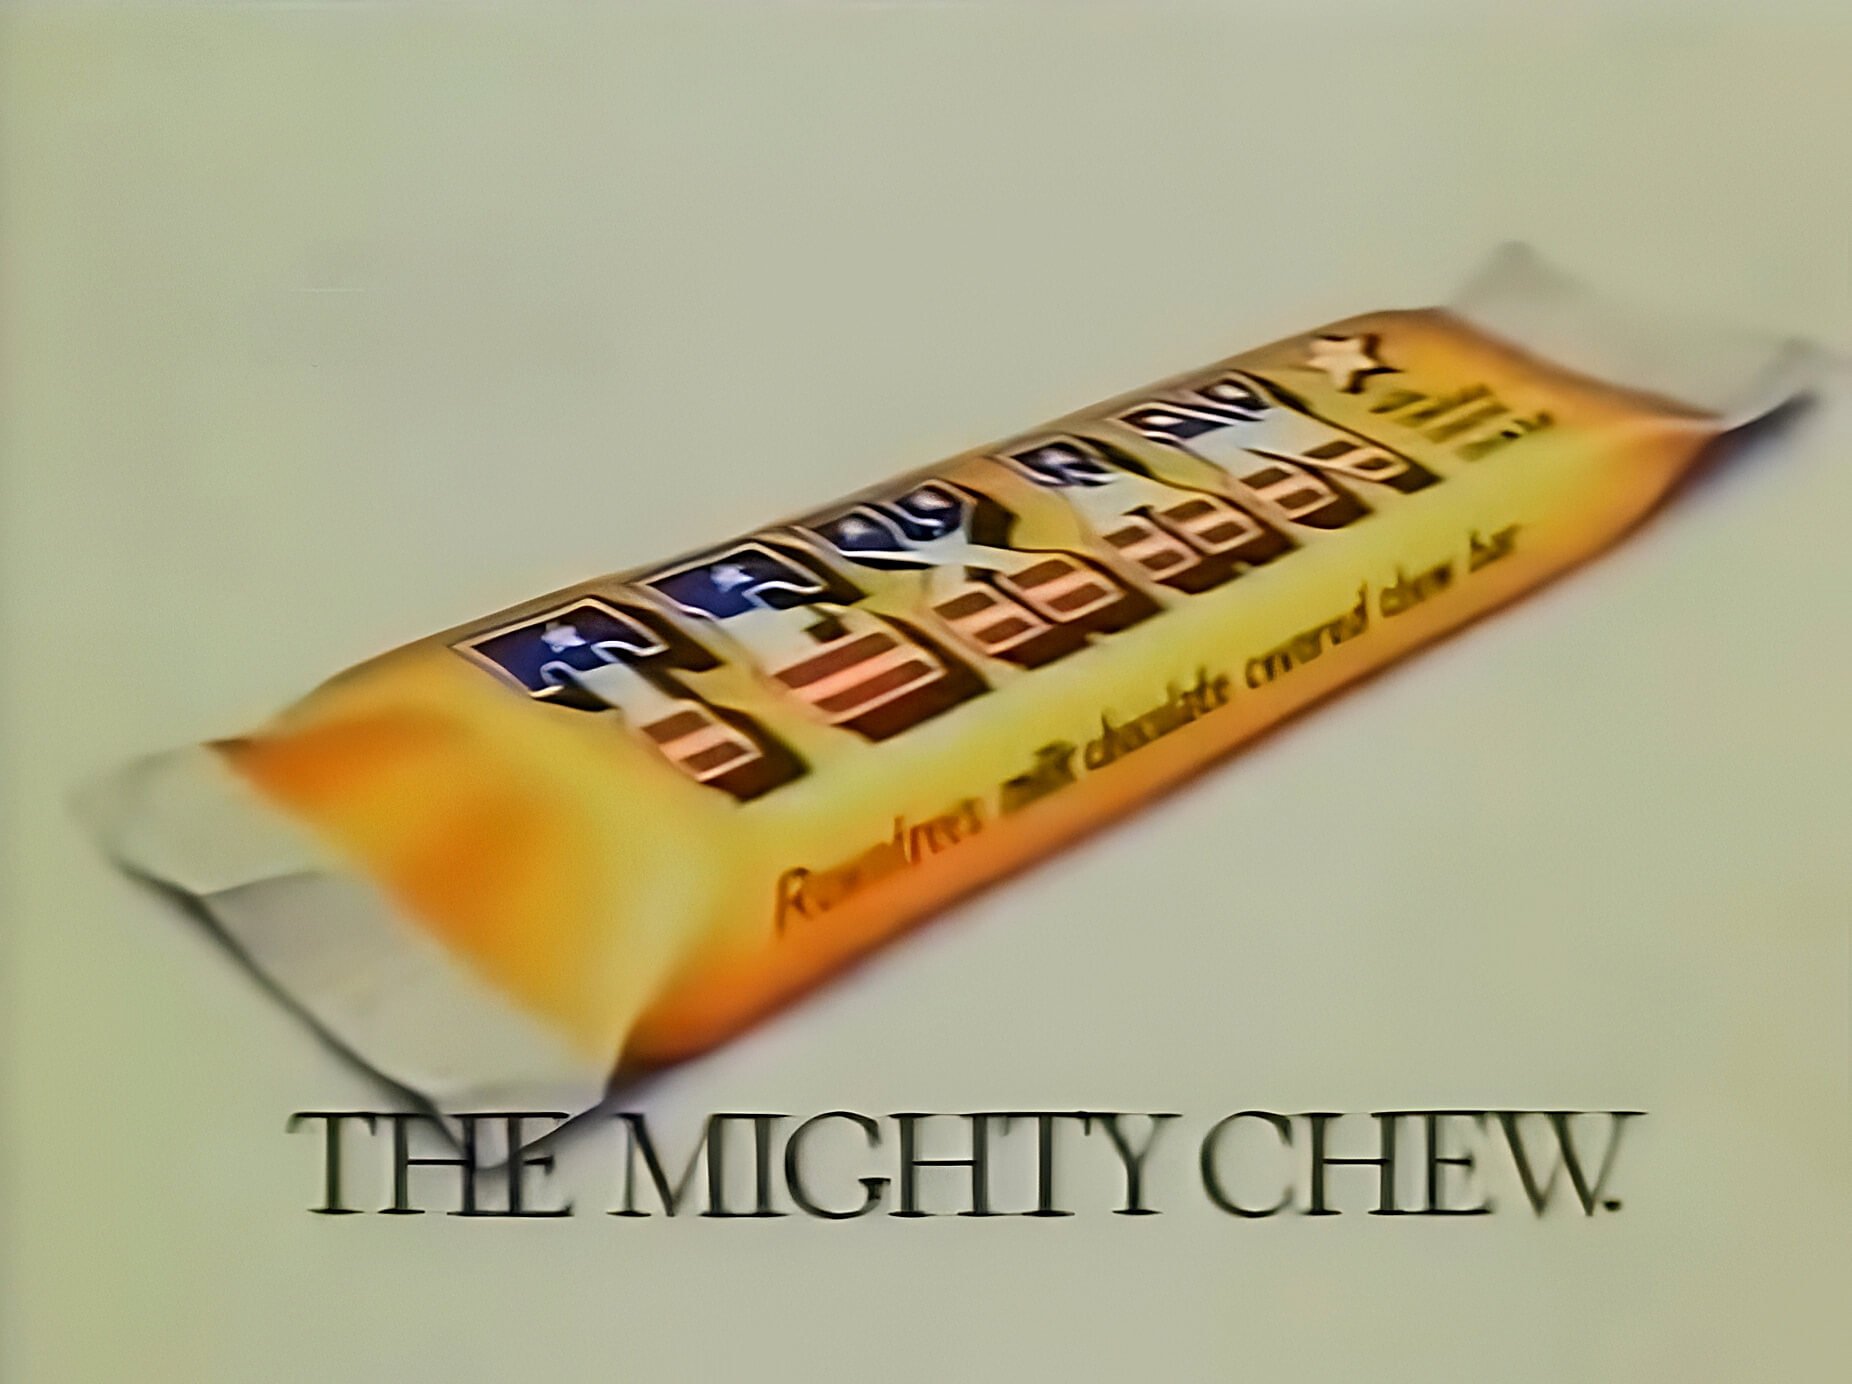 Texan chocolate bar with 'The Might Chew' slogan, from 1973